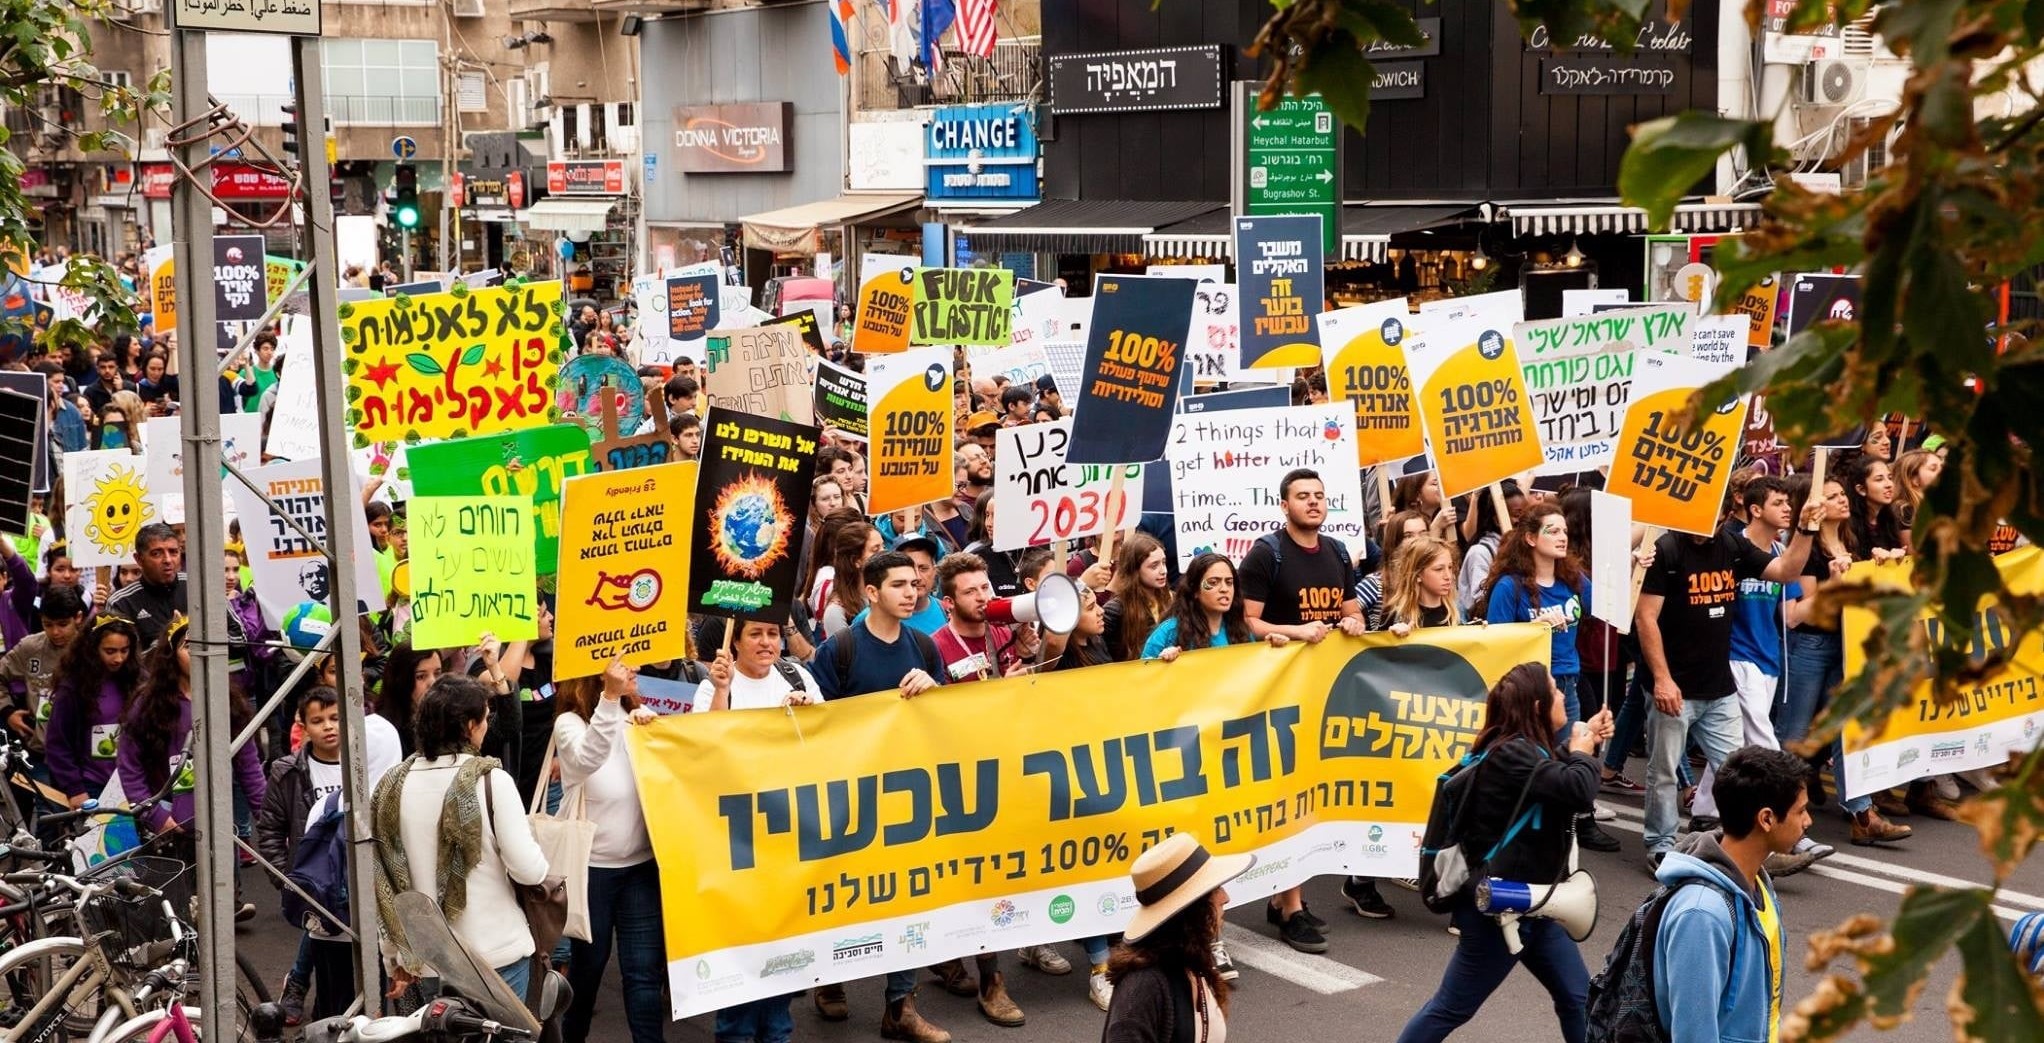 Climate activists stage a rally in Central Tel Aviv, February 15, 2021. The large yellow banner emphasizes: “NOW it’s burning.”